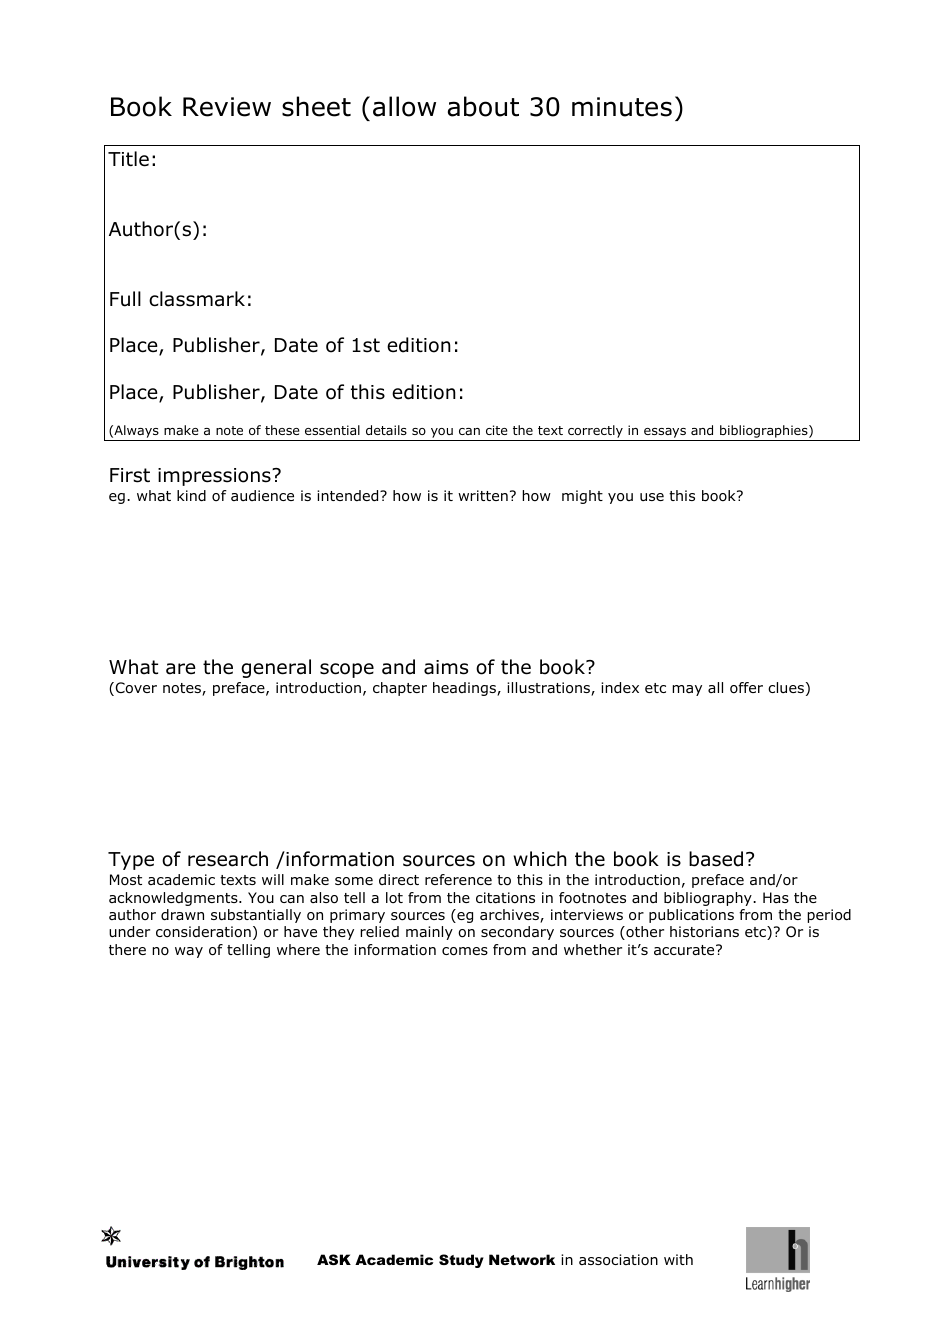 Book Review Sheet Templatedoc preview